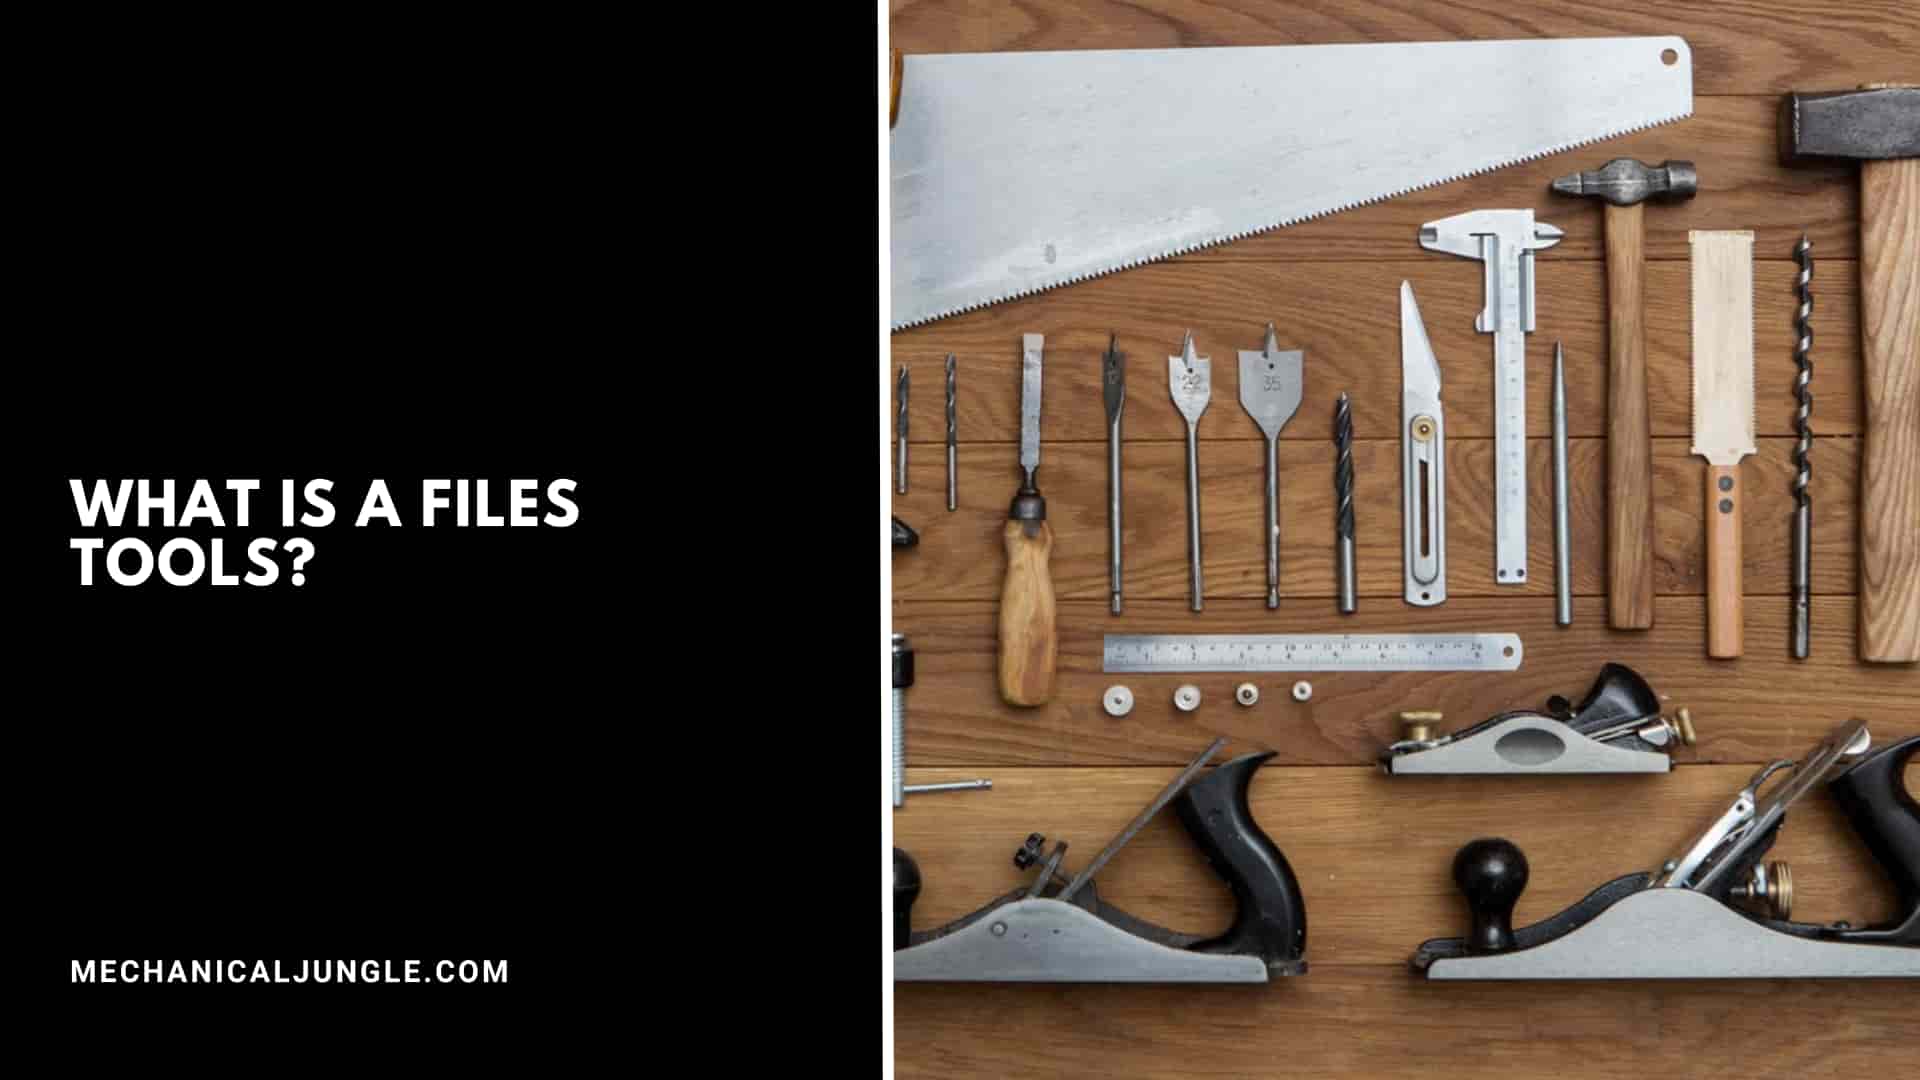 What Is a Files Tools?